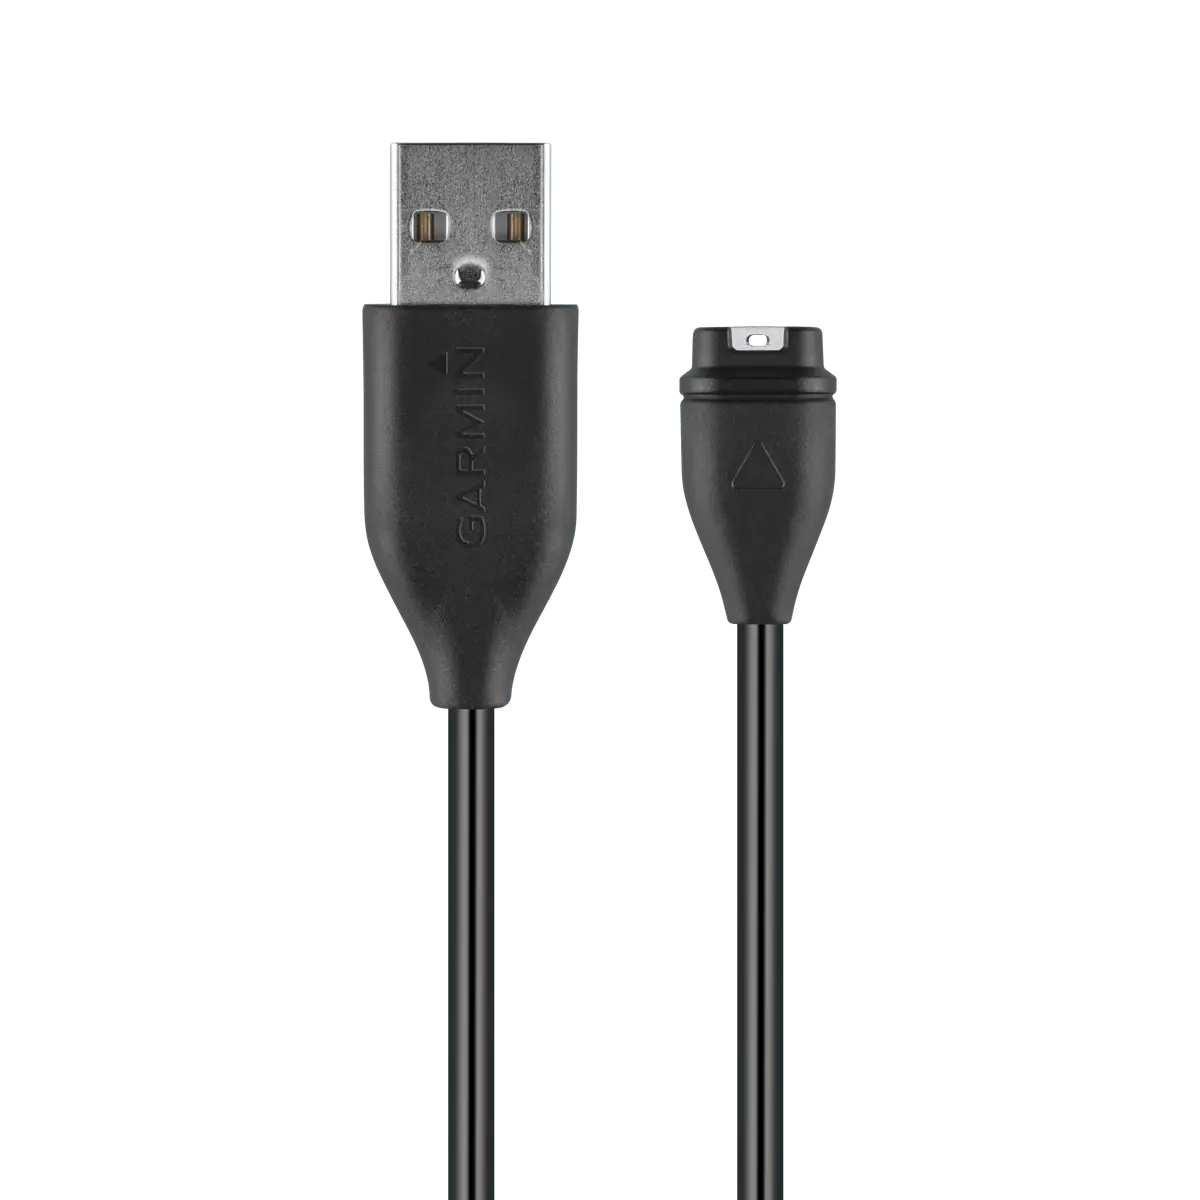 How the Adreama Charging/Data Cable Simplifies Device Management for Garmin Users